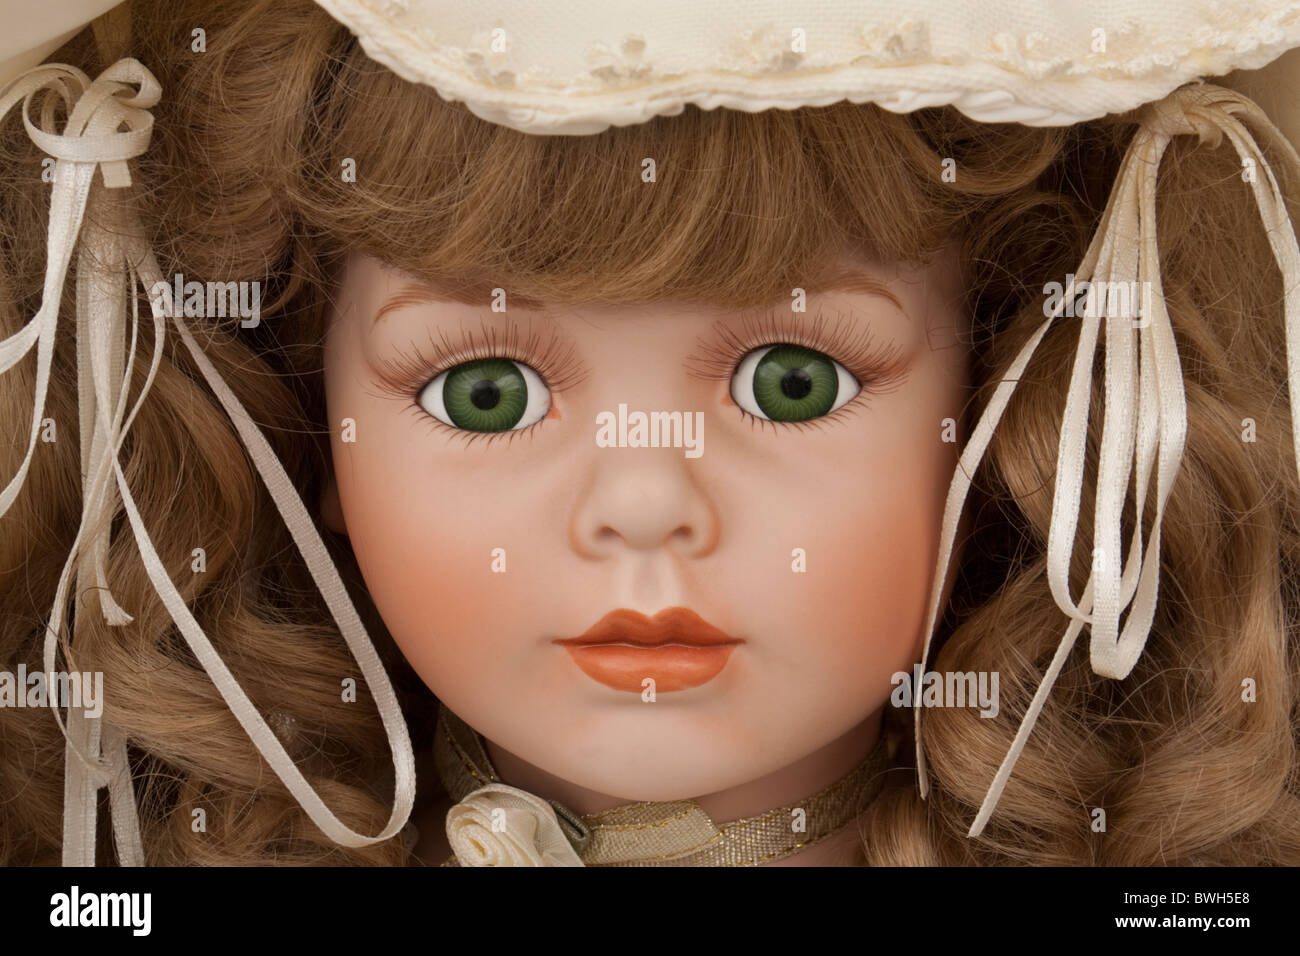 Bisque doll (Porcelain doll Stock Photo - Alamy